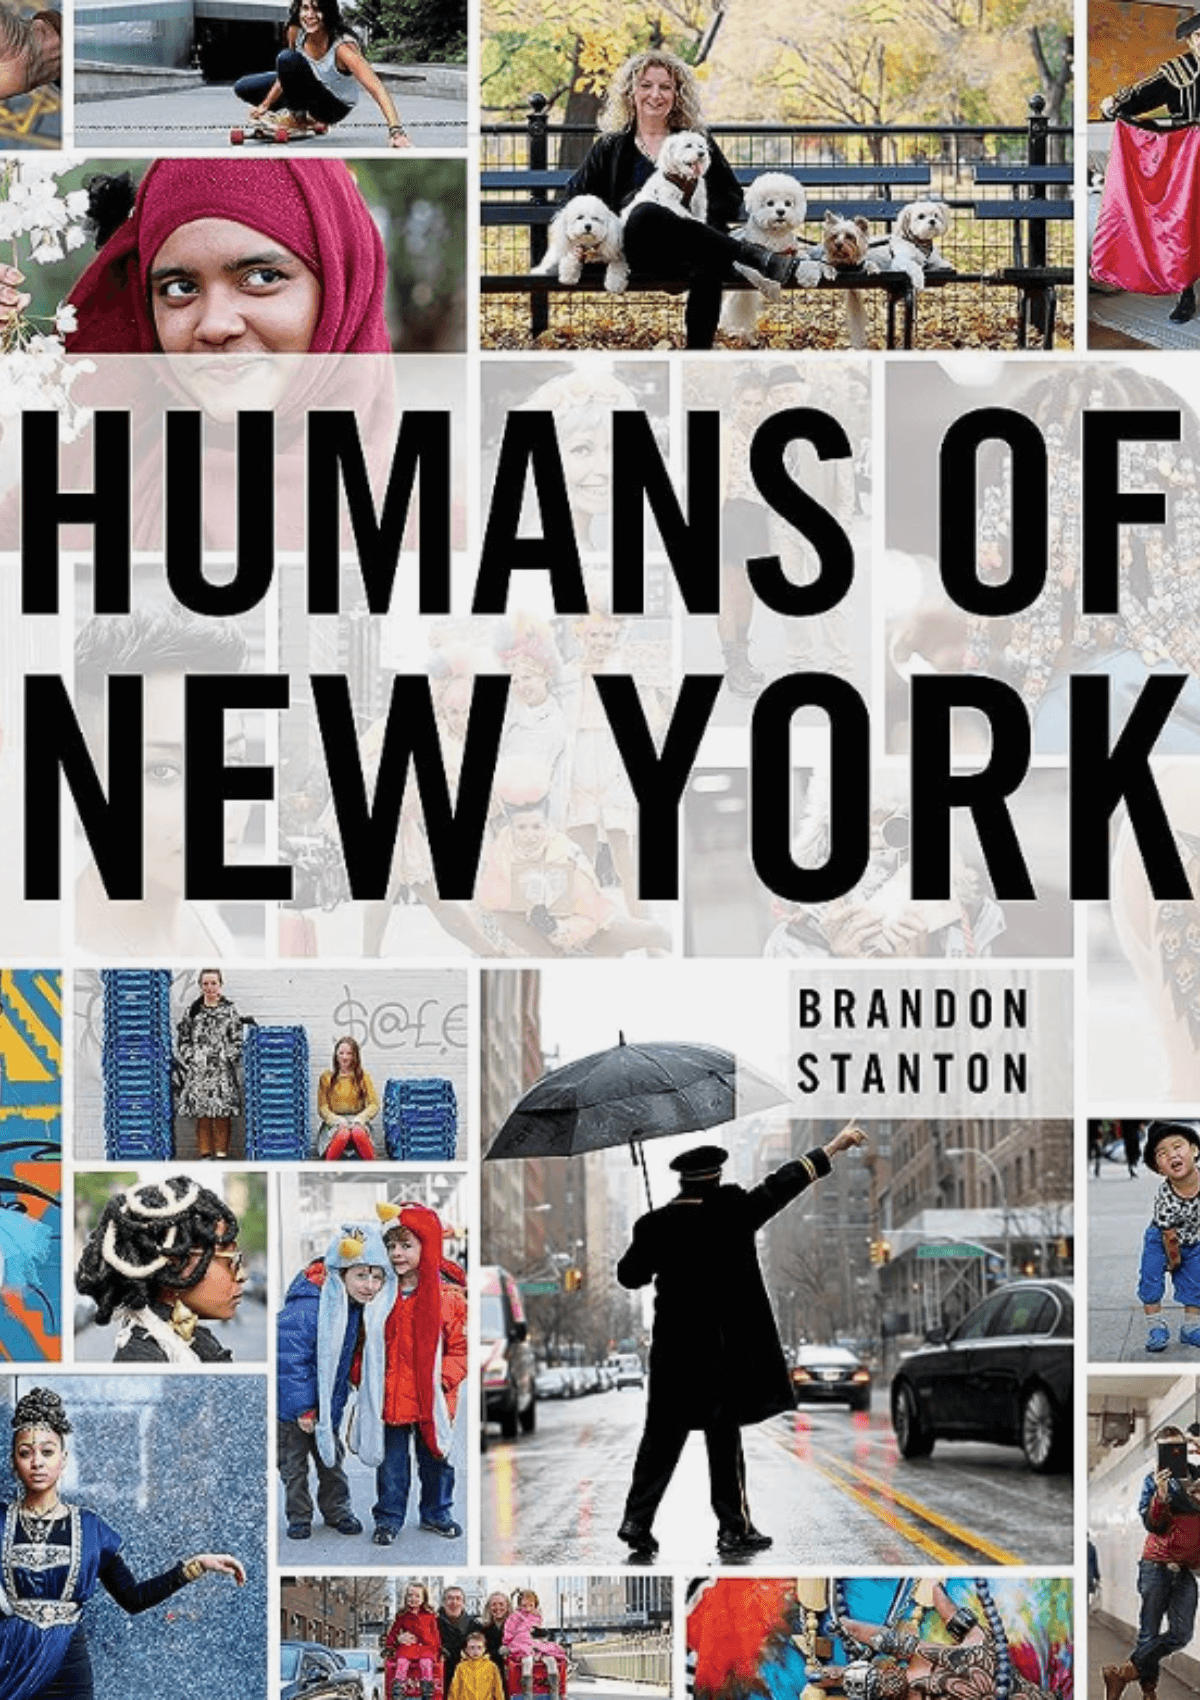 "Humans of New York" book is a classic souvenir showcasing residents of the city.